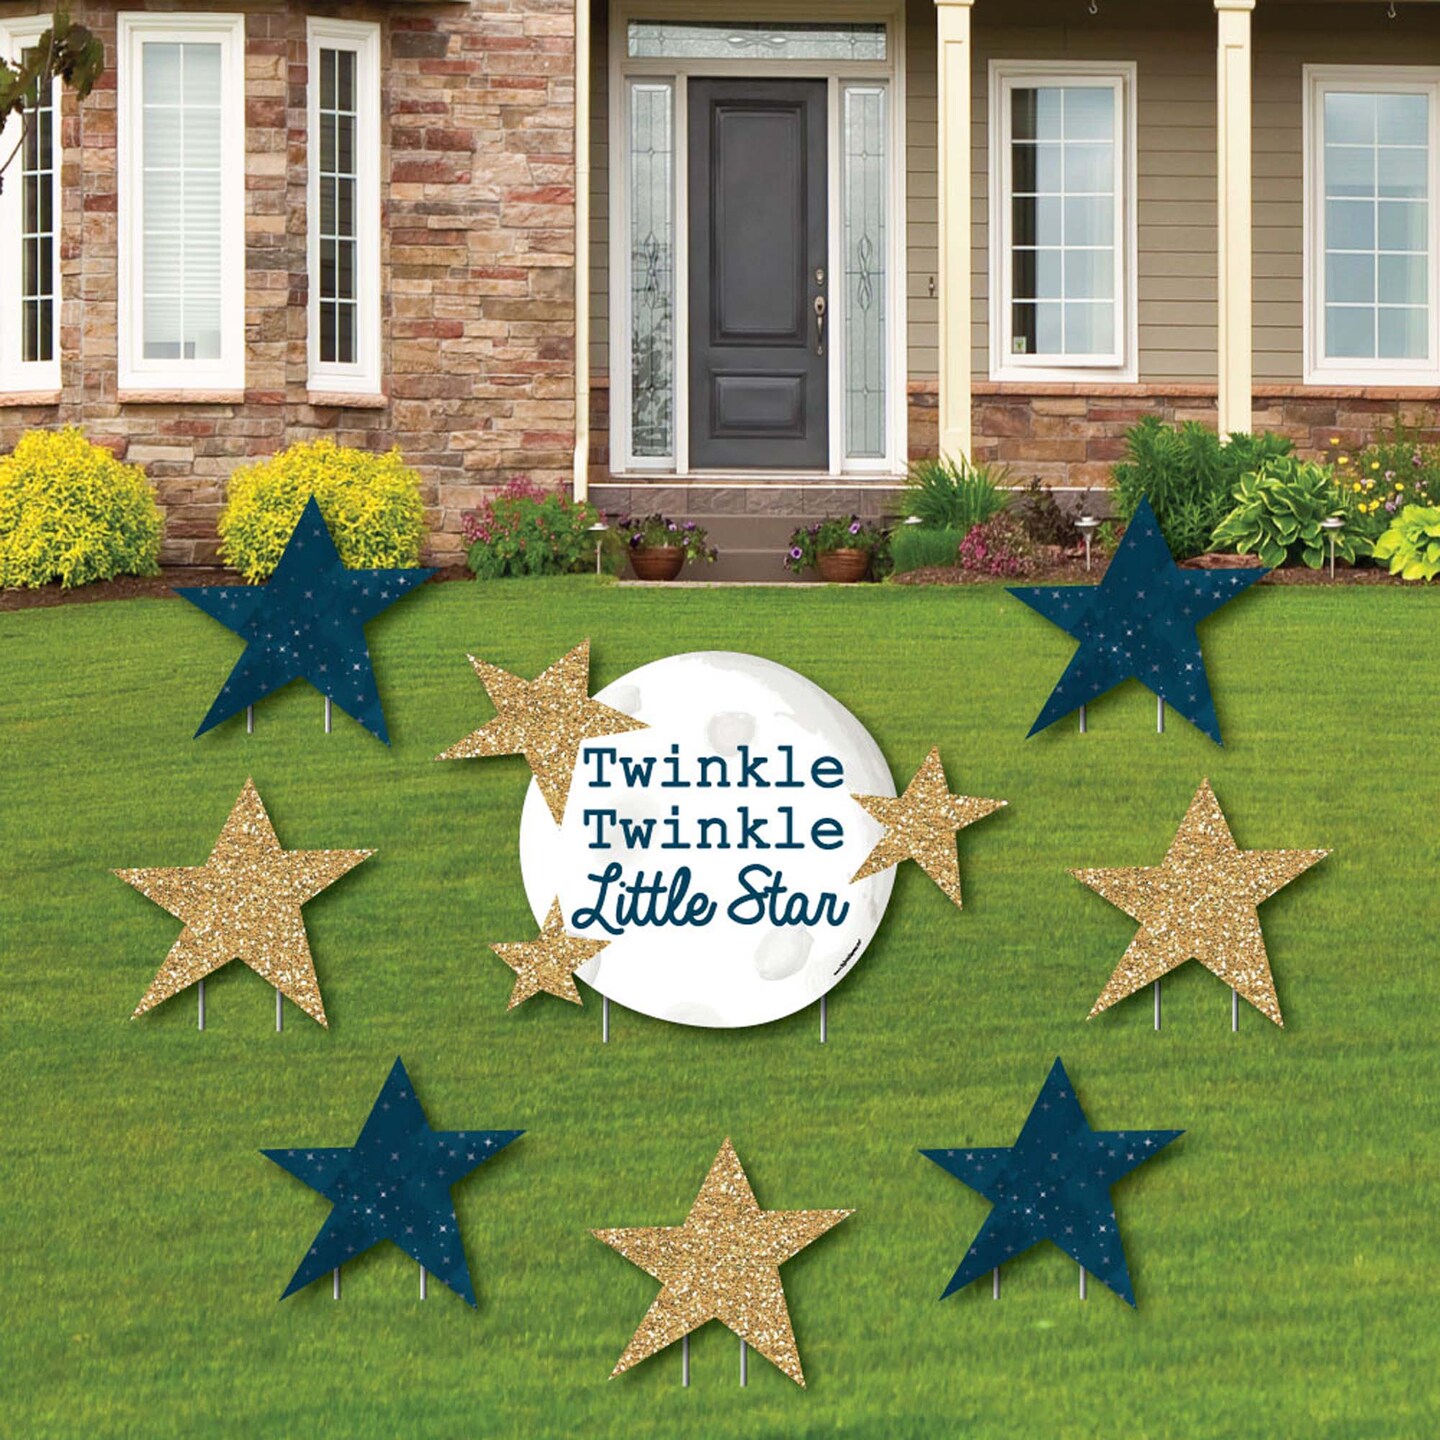 Big Dot of Happiness Twinkle Twinkle Little Star - Yard Sign &#x26; Outdoor Lawn Decorations - Baby Shower or Birthday Party Yard Signs - Set of 8